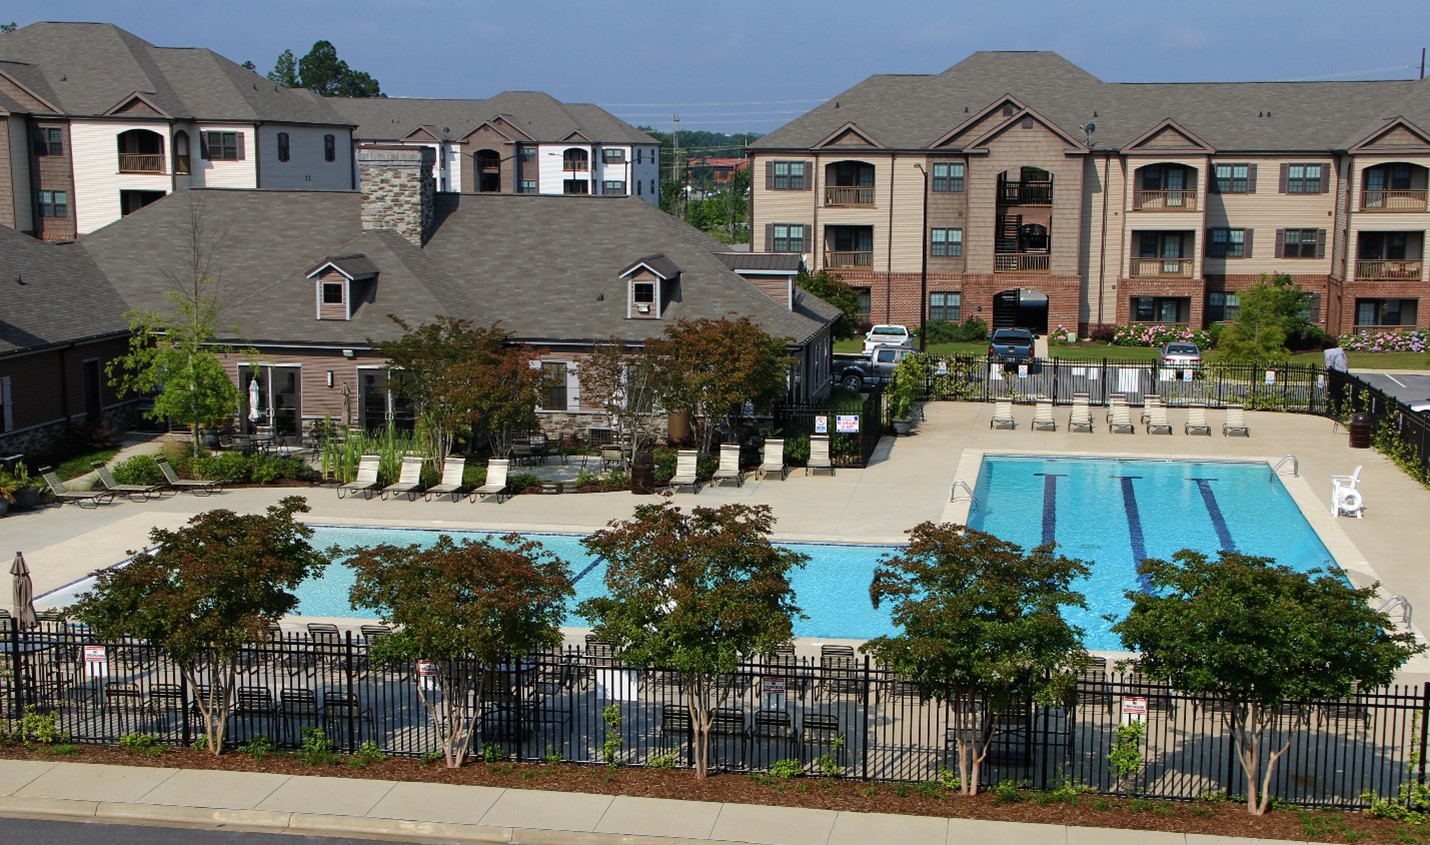 Randolph Pointe’s amenities include a well-appointed community center with a gym, game room and resort-style pool.